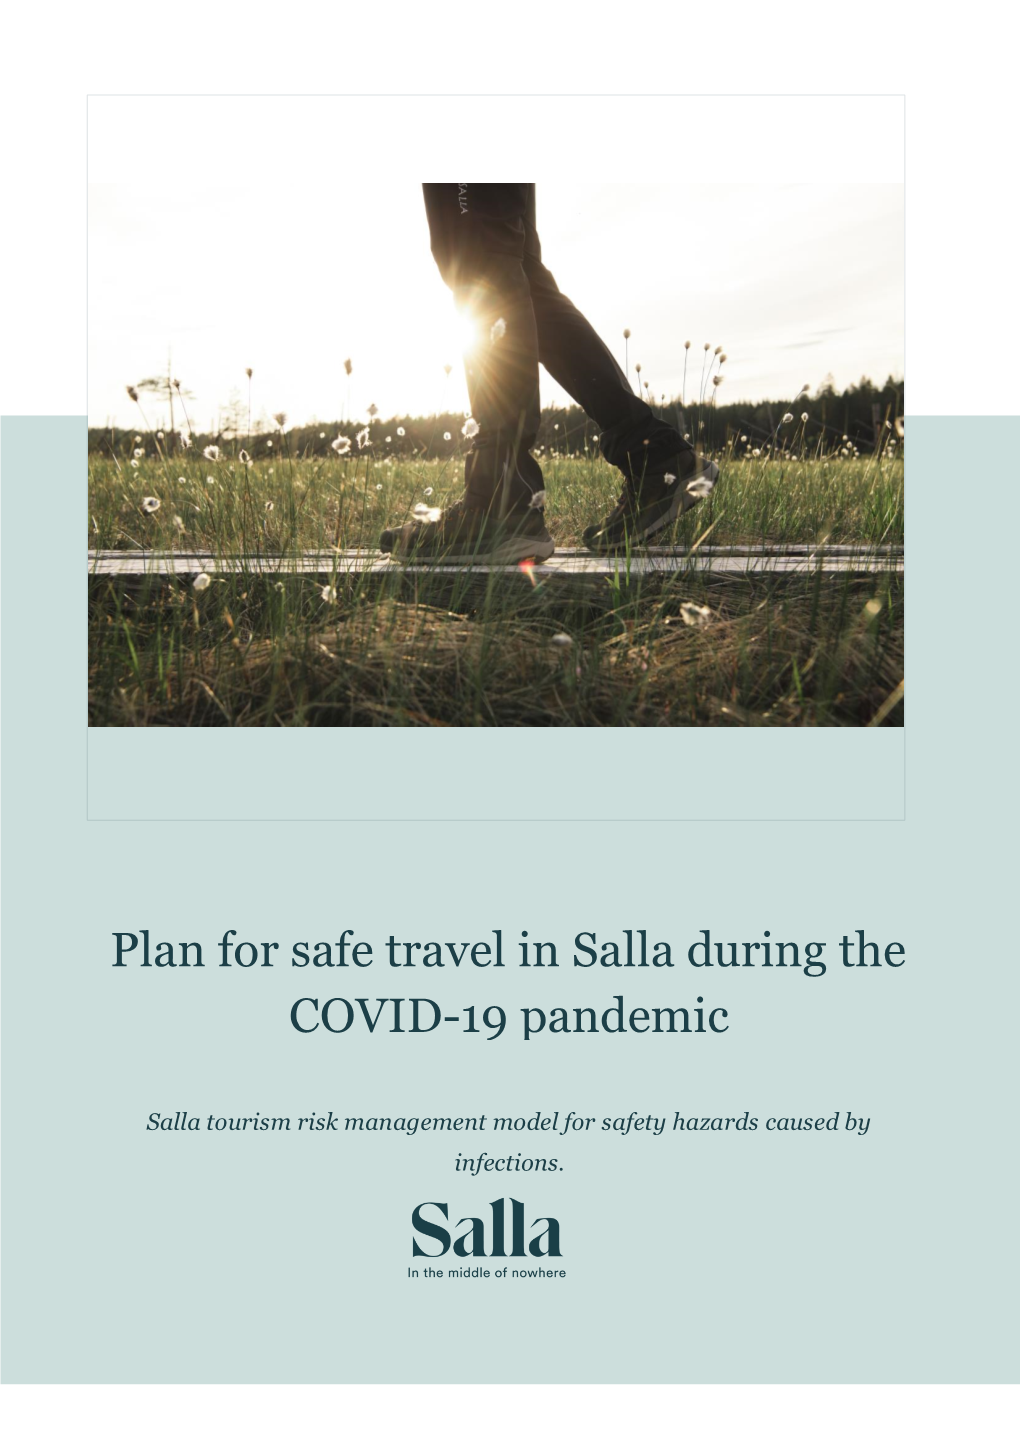 A Plan for Covid -19 Safety Travelling to Salla